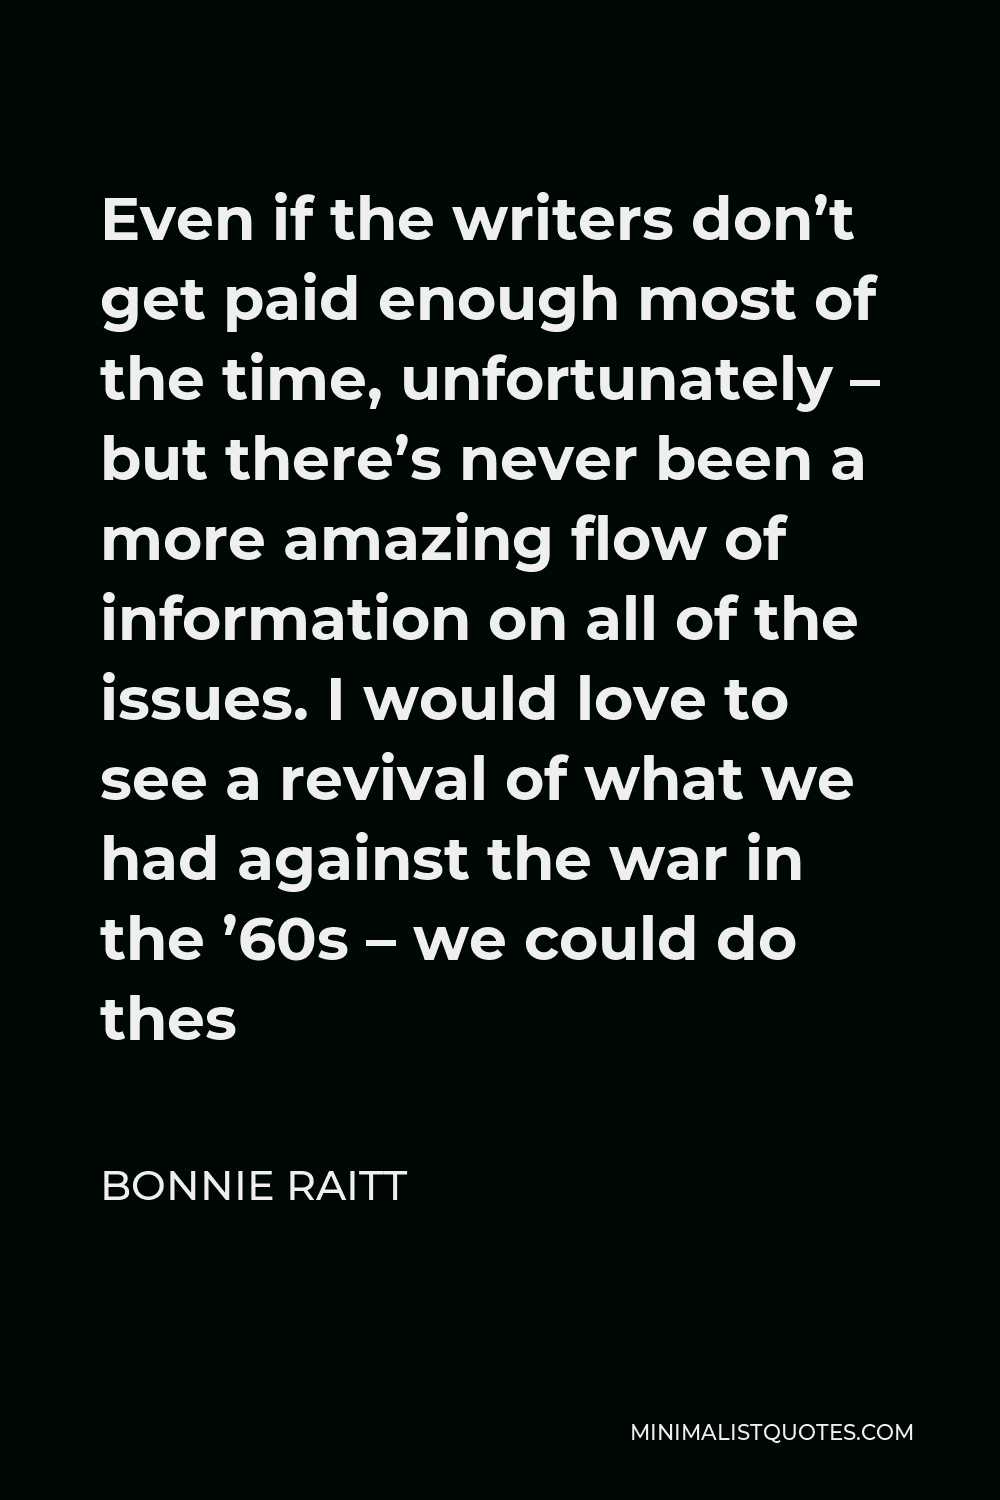 Bonnie Raitt Quote Even if the writers don't get paid enough most of